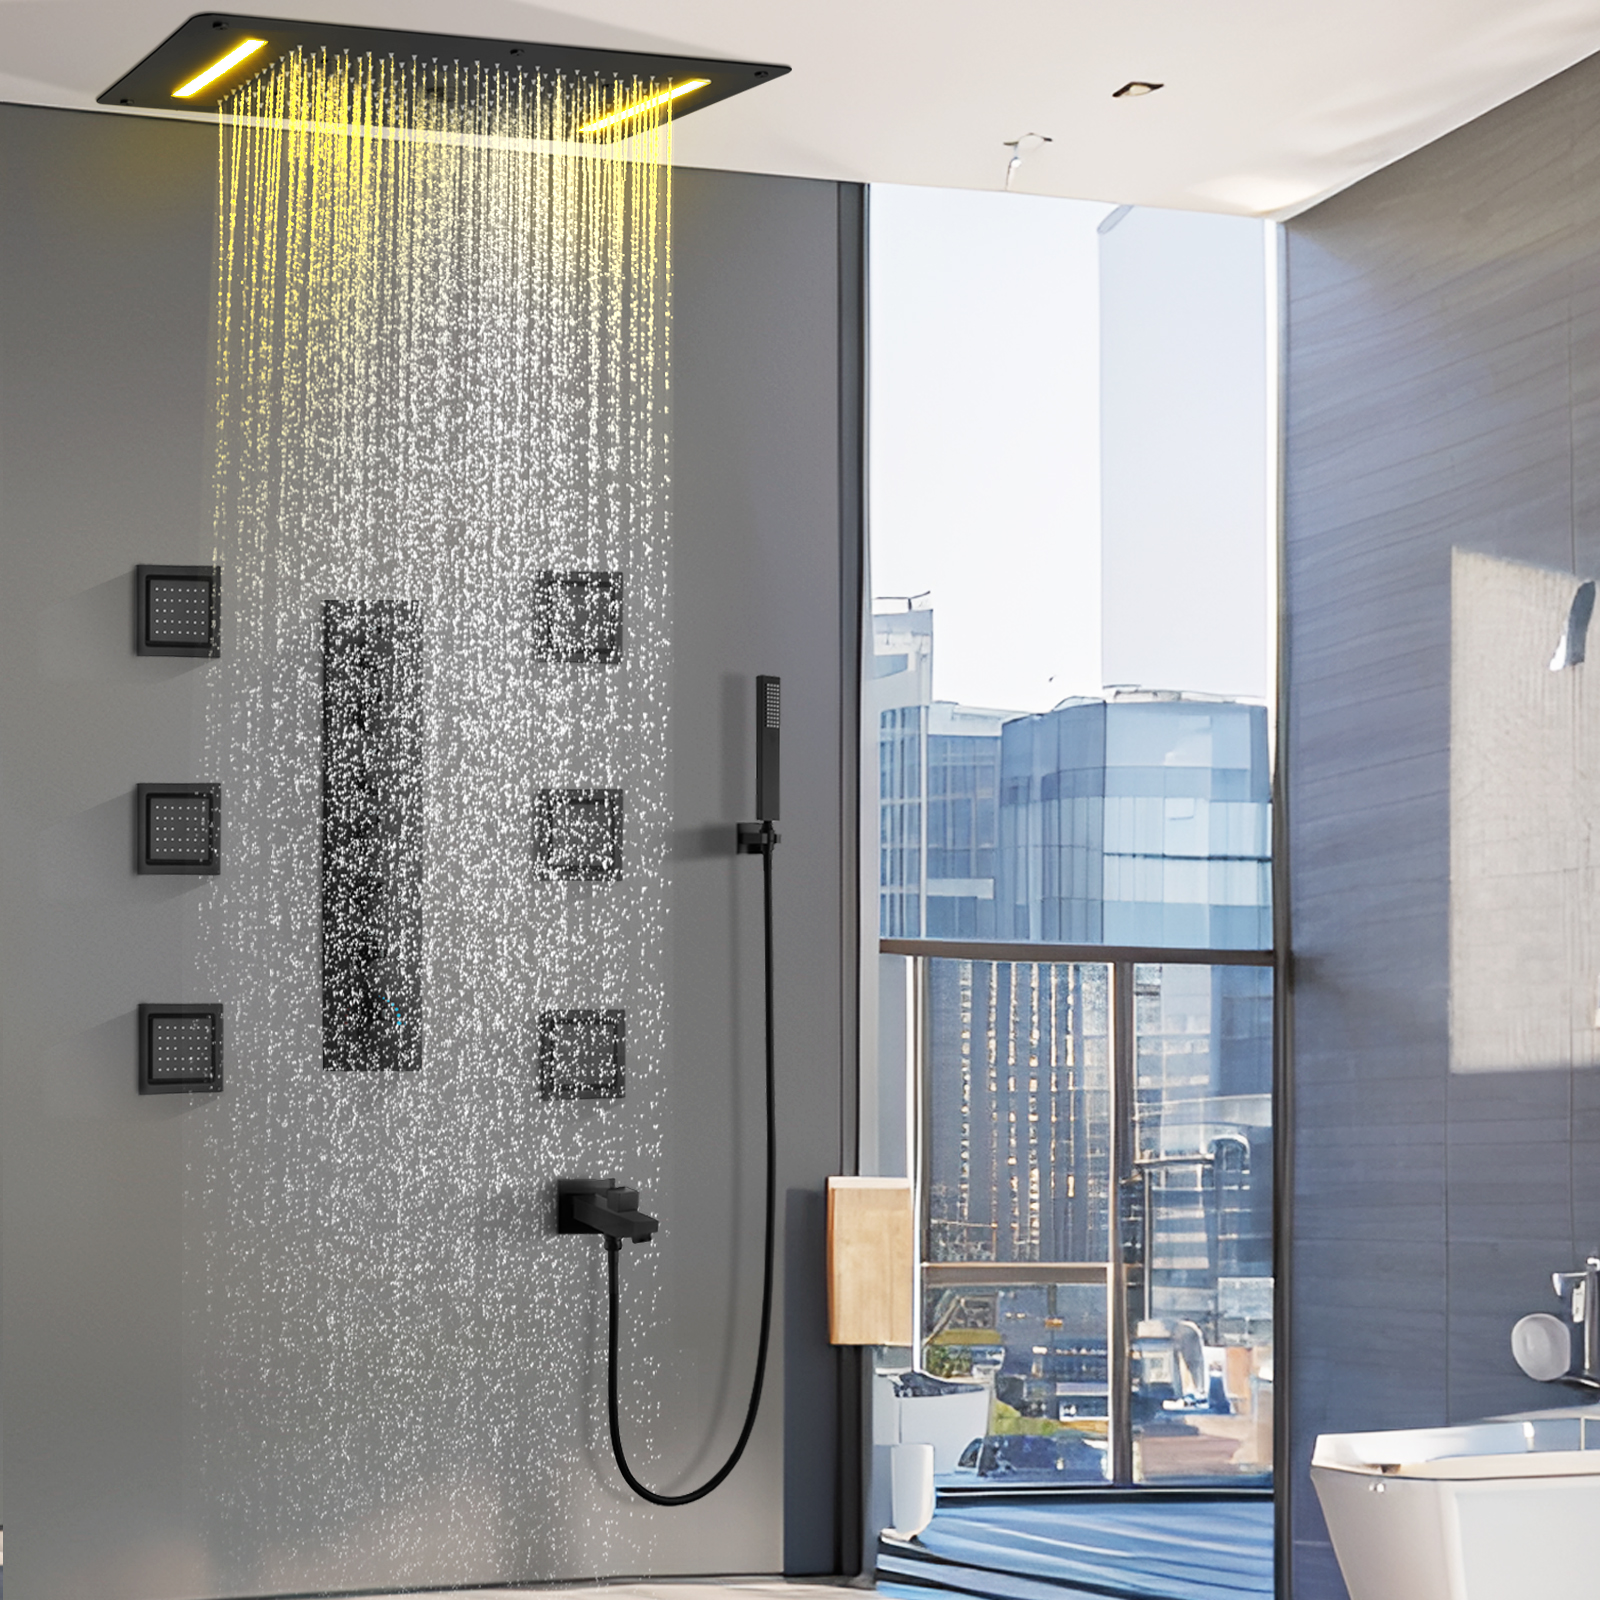 Choosing The Right Shower Head And Valve Set: The Ultimate Home Renovation Guide